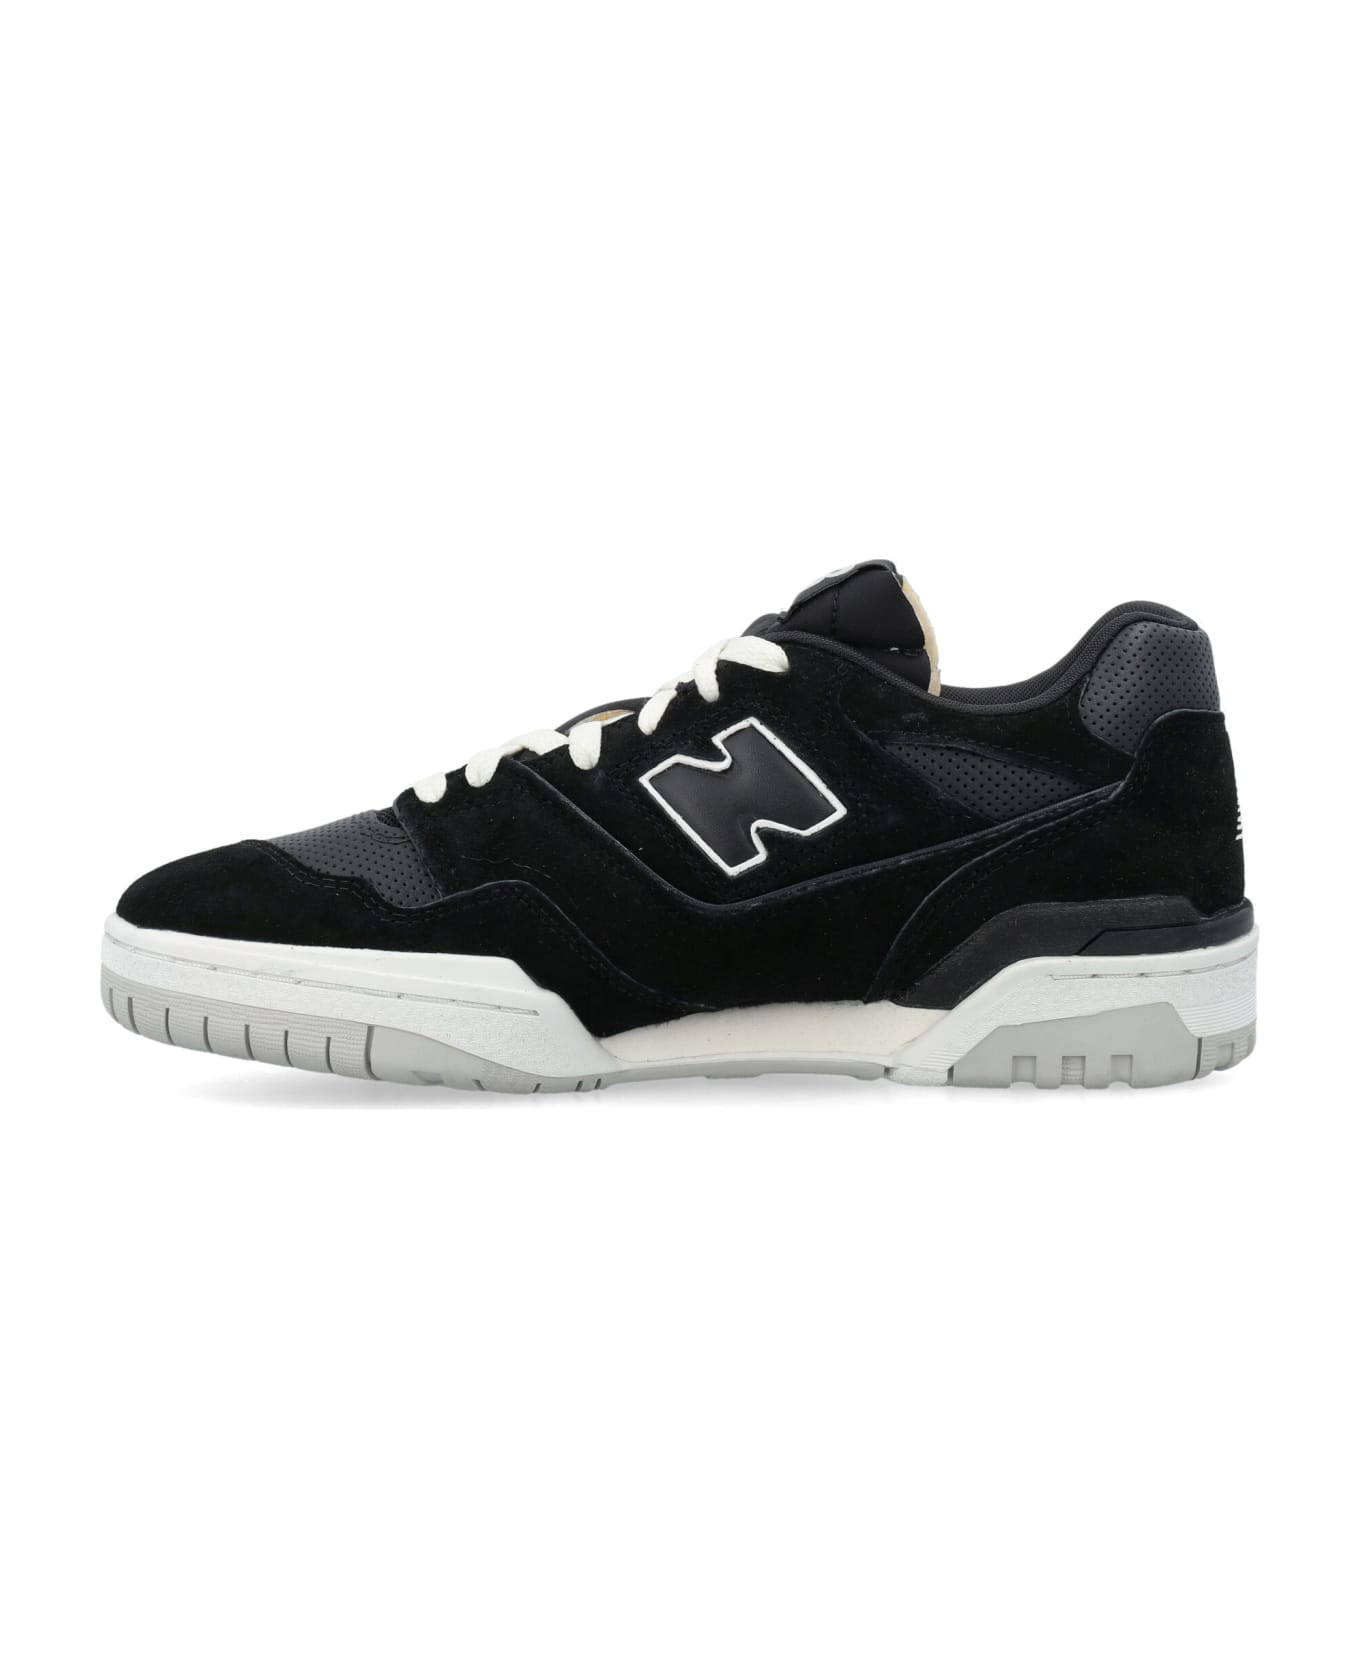 New Balance Suede And Leather 550 - BLACK